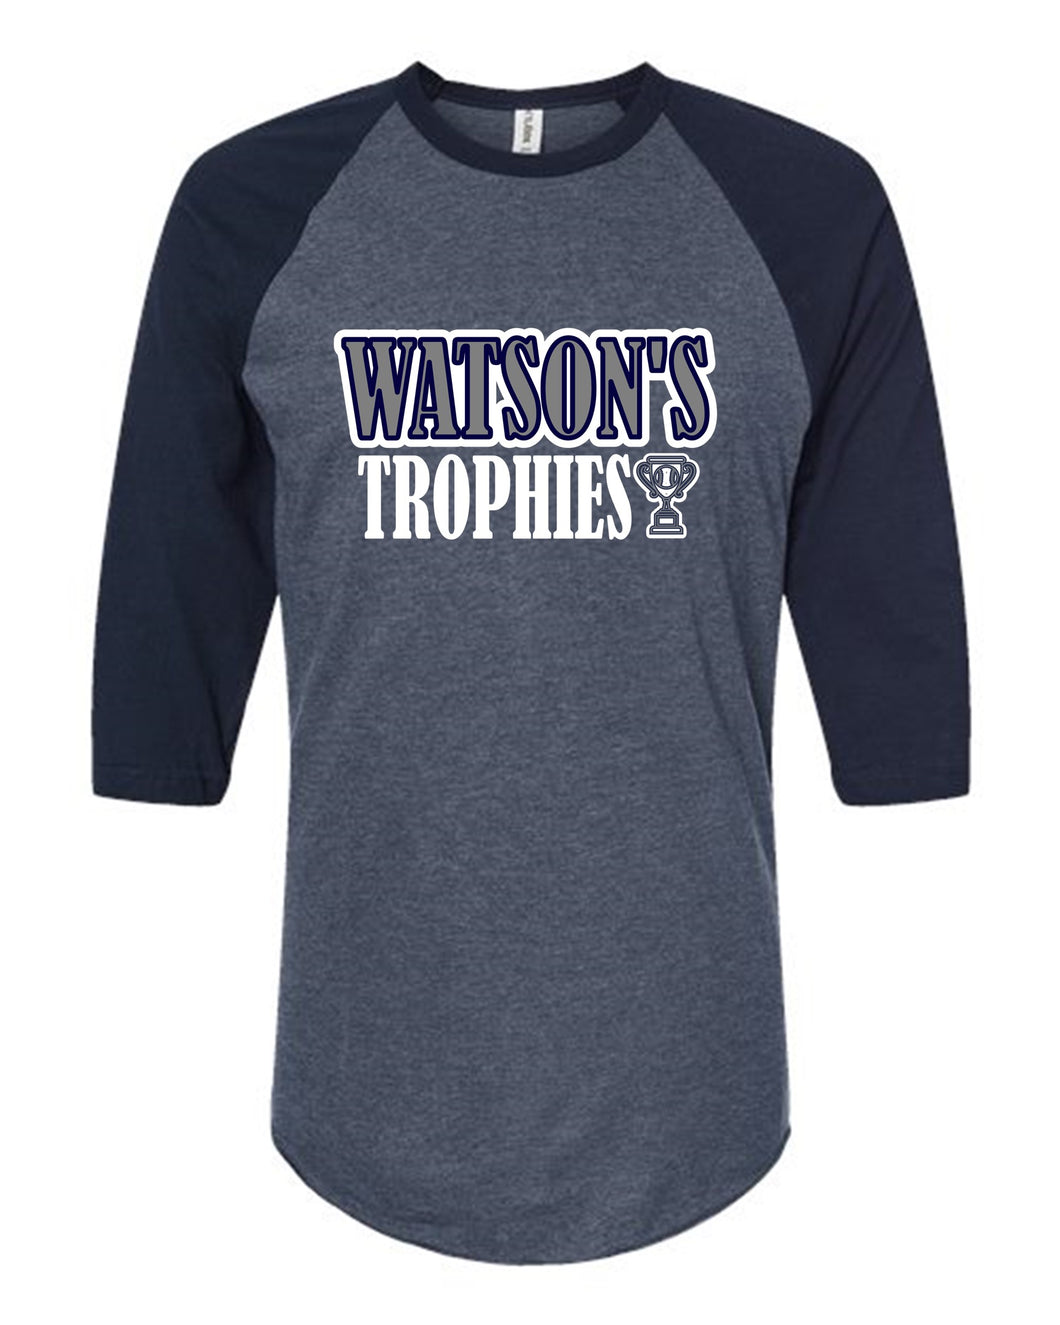 Watson's Trophies Raglan (Adult Sizes Only)